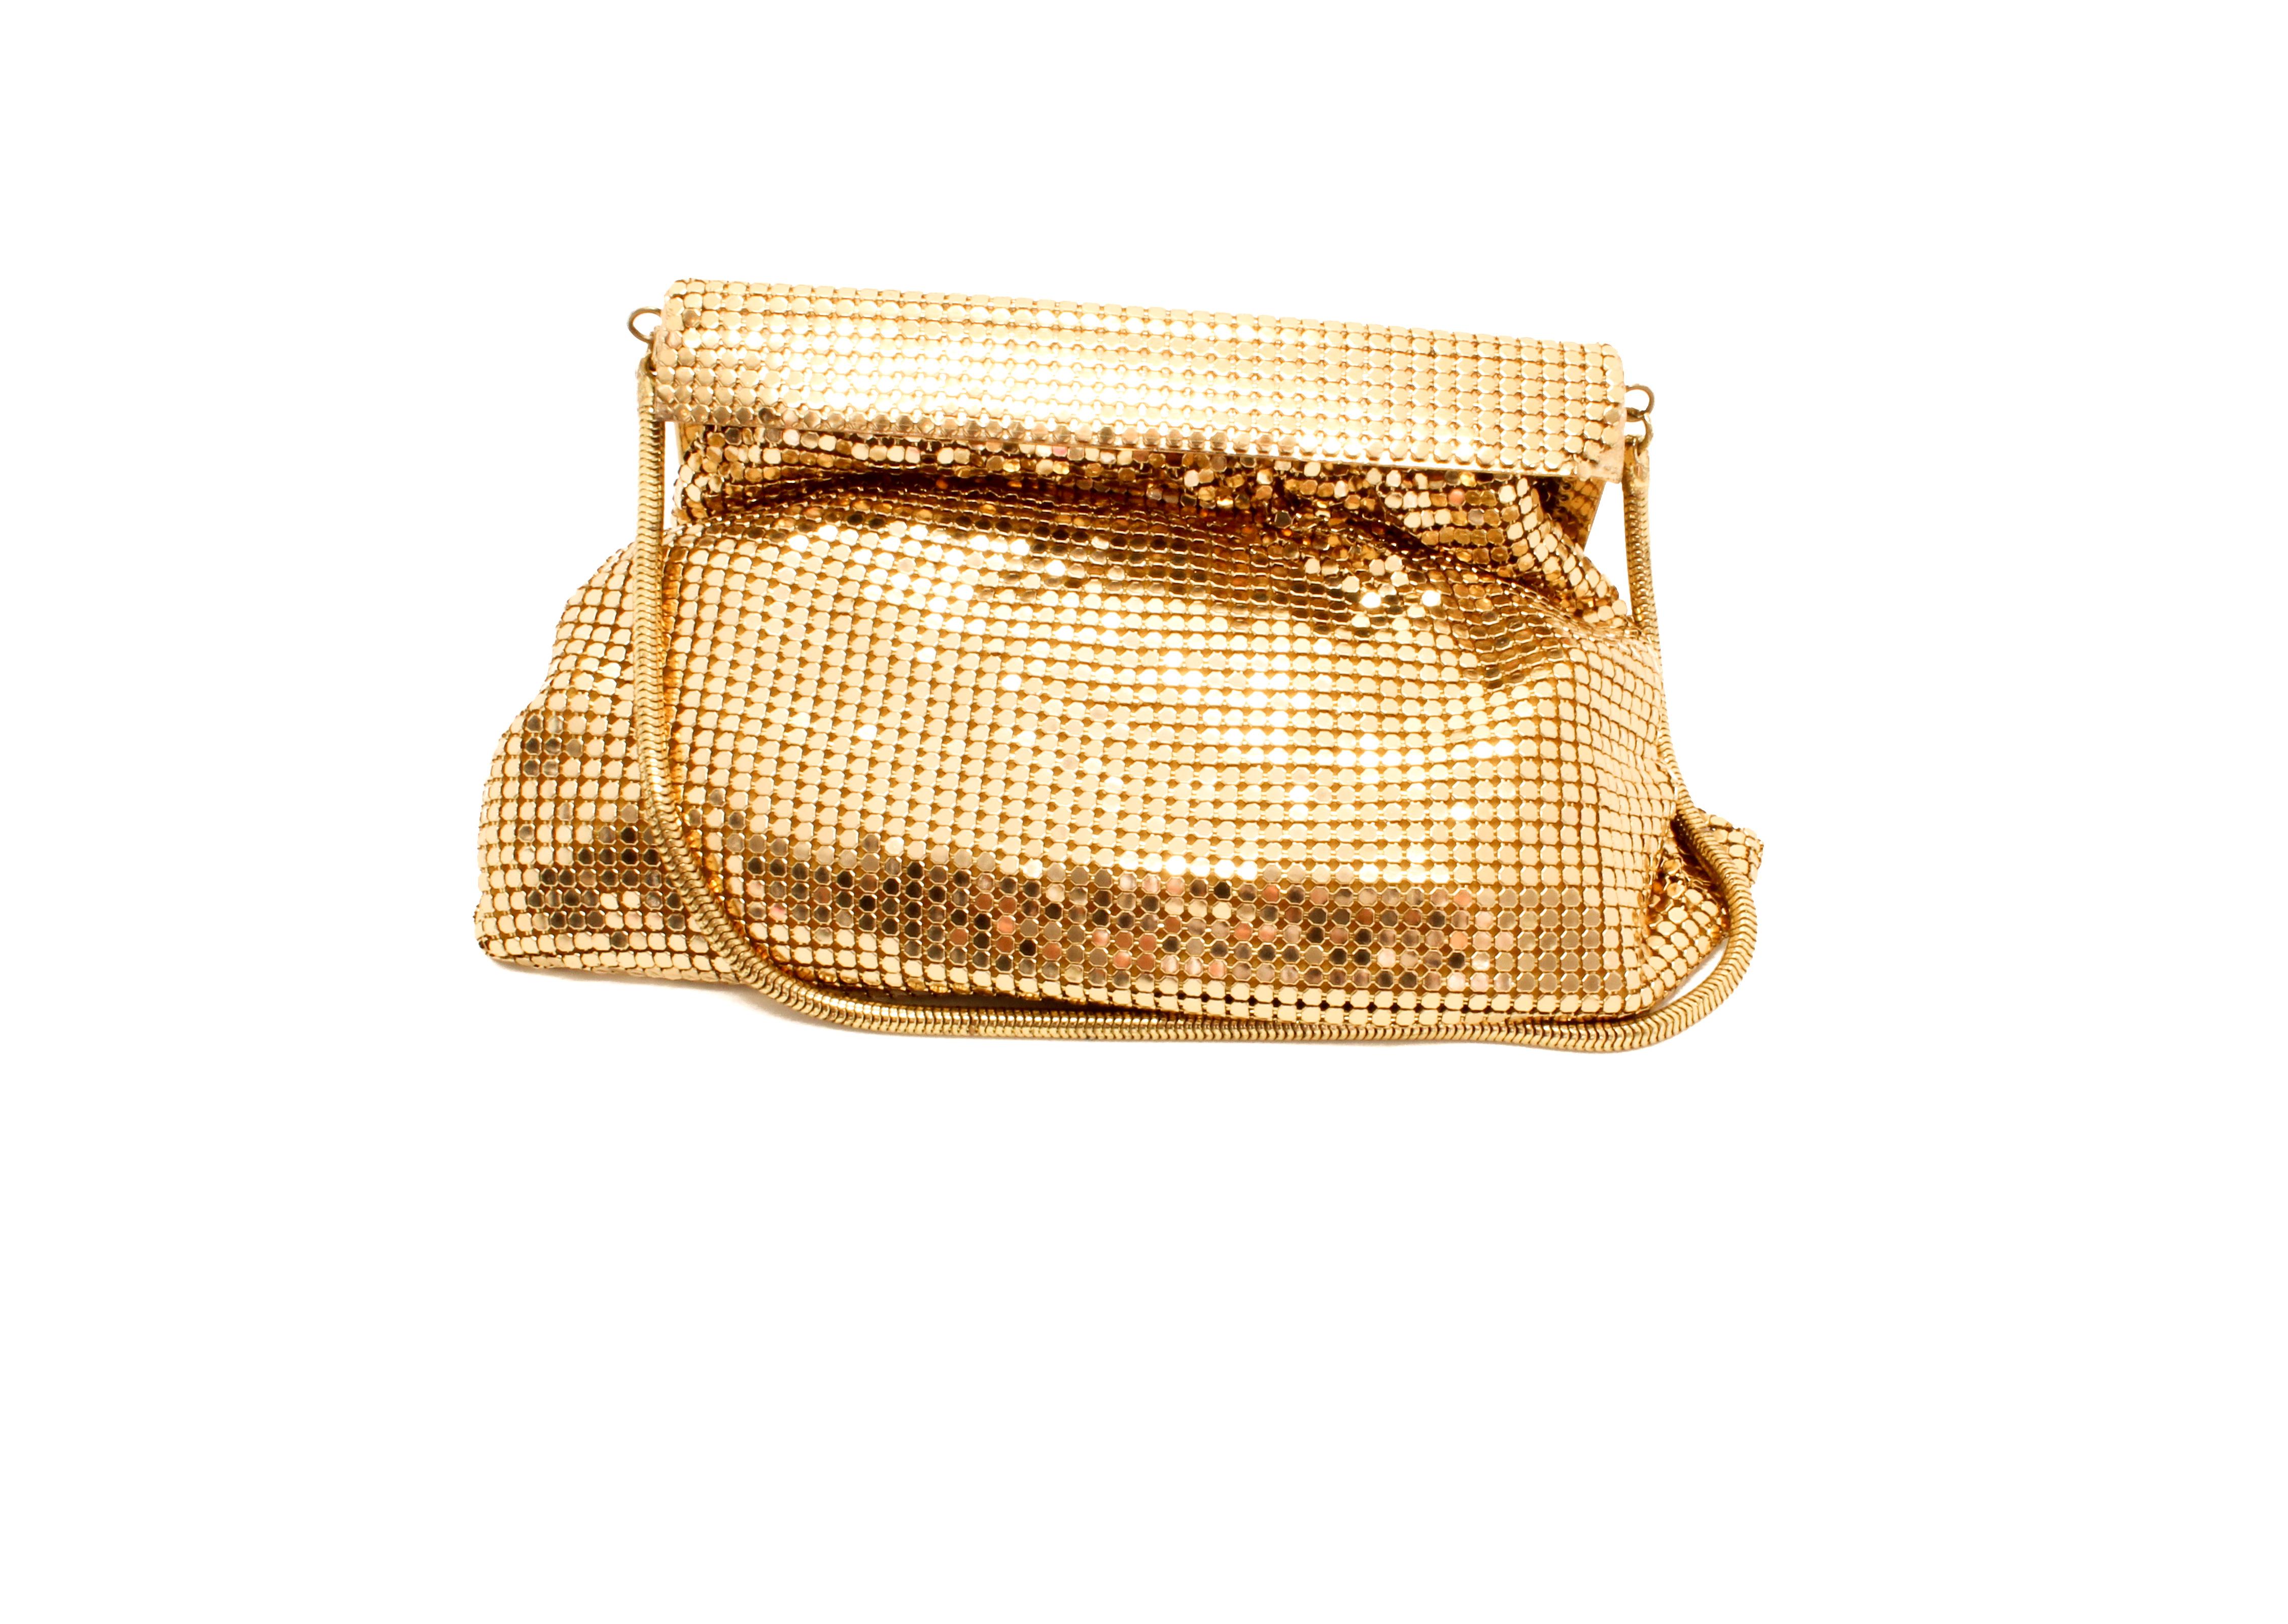 Whiting & Davis 1970s Vintage Gold Tone Mesh Evening Bag.

In 1892, Charles Whiting wove by hand the first Whiting & Davis handbag, transforming the ancient art of chainmail into a fabric.  Whiting & Davis' original accessories were hugely popular